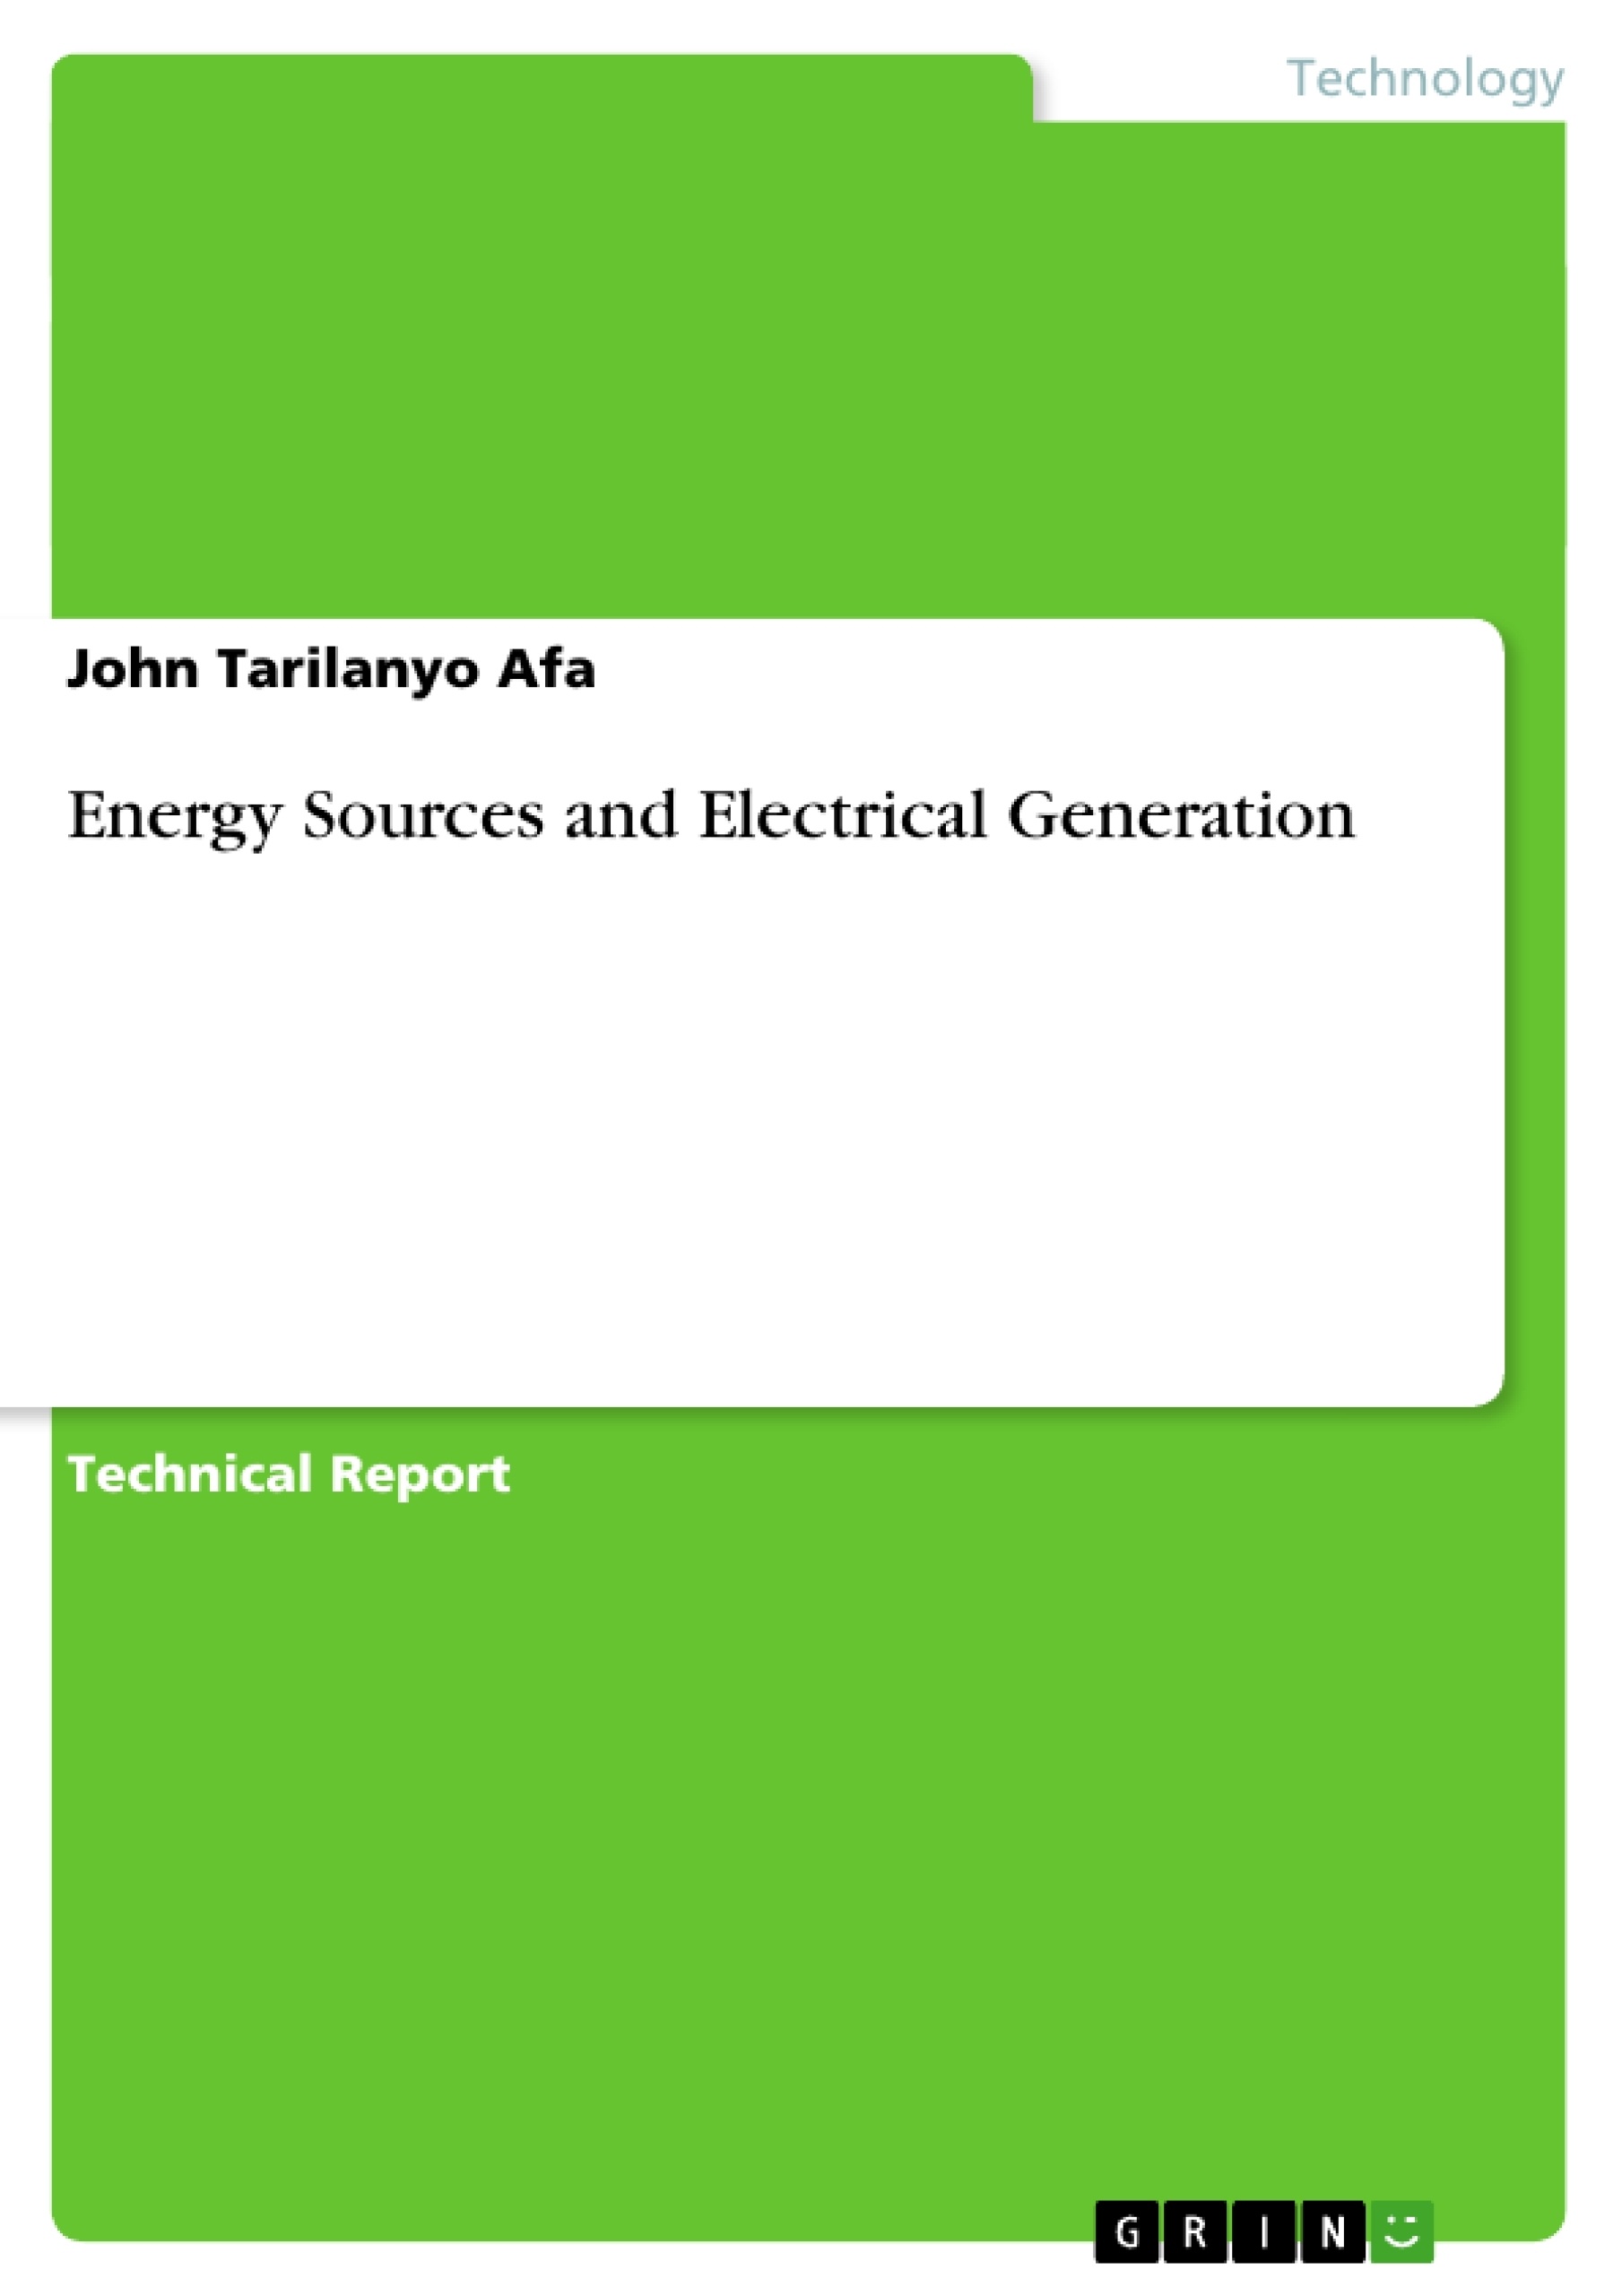 Title: Energy Sources and Electrical Generation